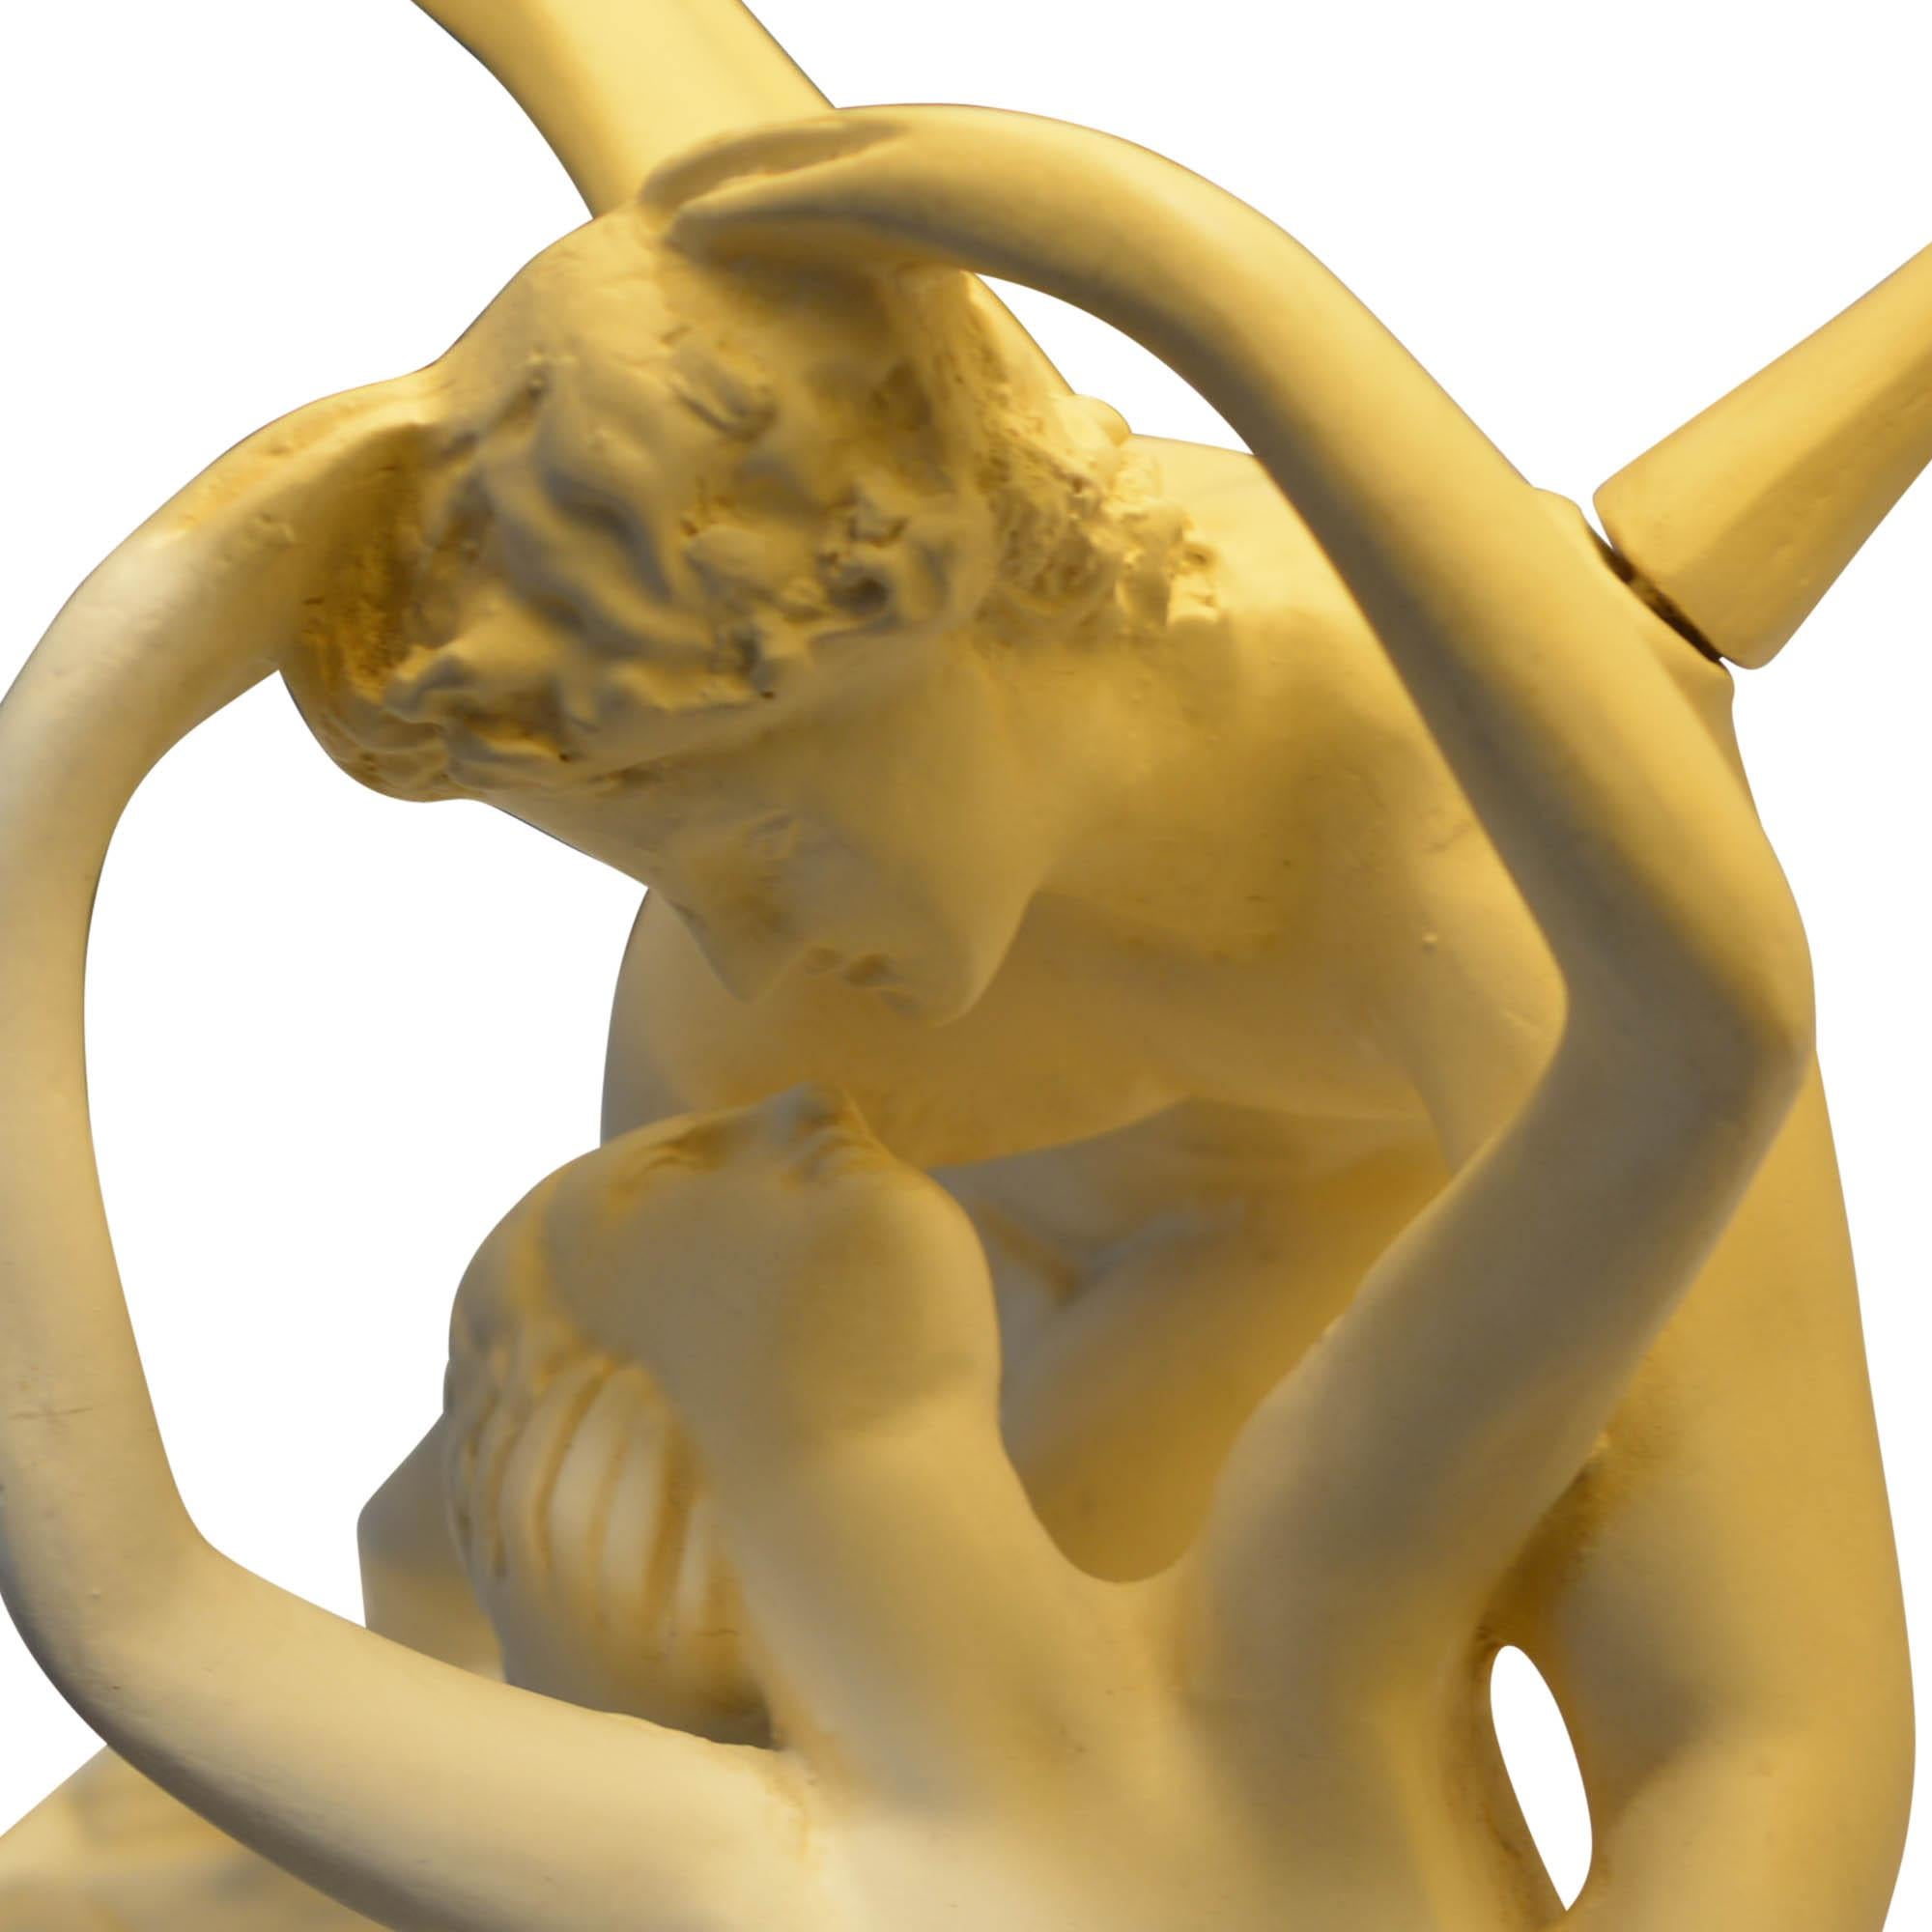 Psyche Revived by Cupid's Kiss Lamp on Marble Base Black Shade Gold Lining 2